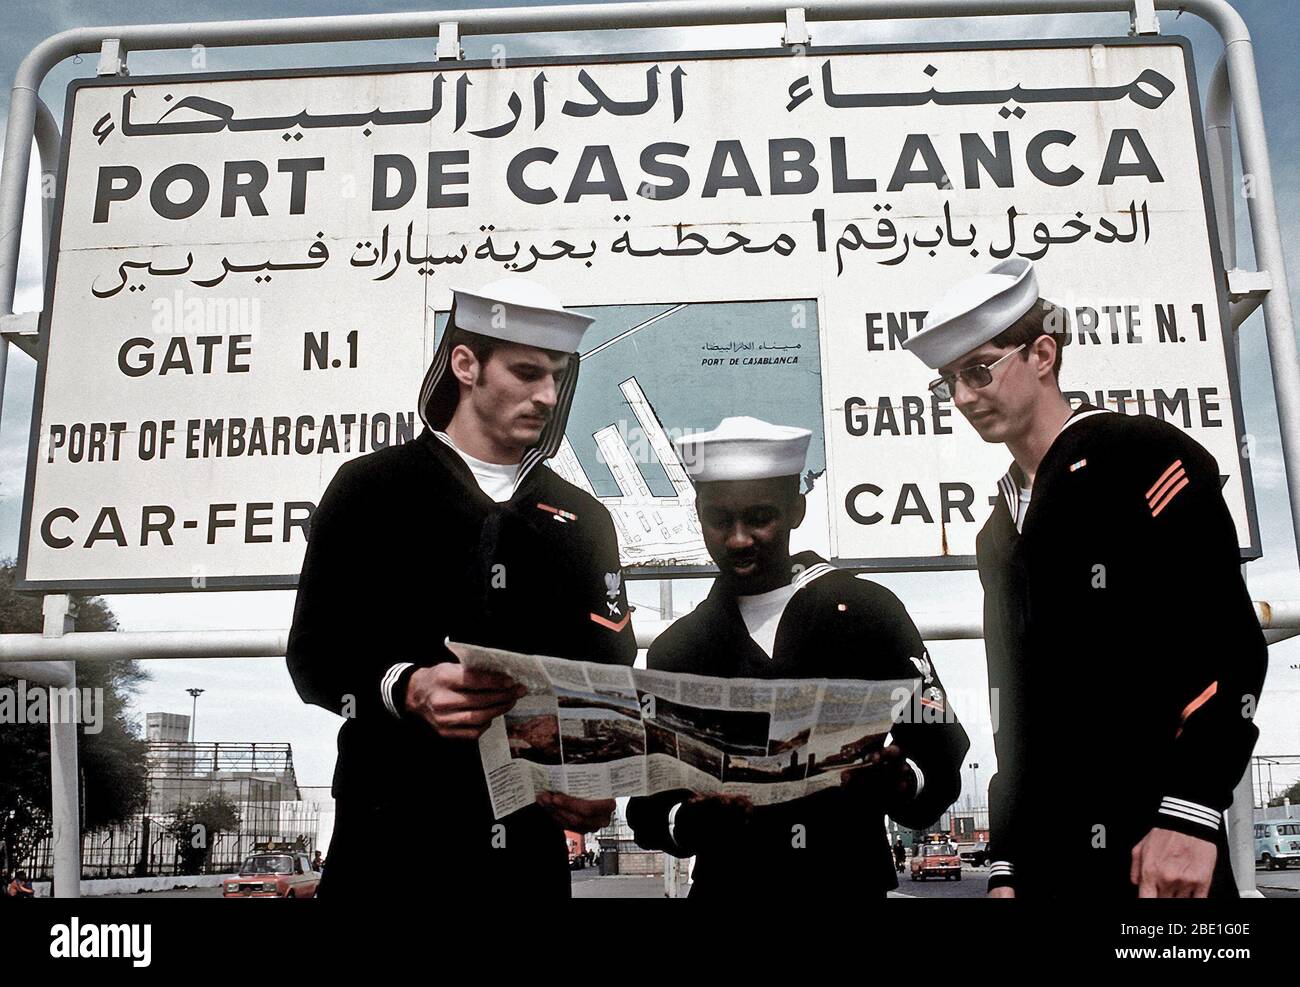 1982 - U.S. Sailors look at their map at the entrance to Port De Casablanca,  during a port visit. Casablanca Morocco Stock Photo - Alamy